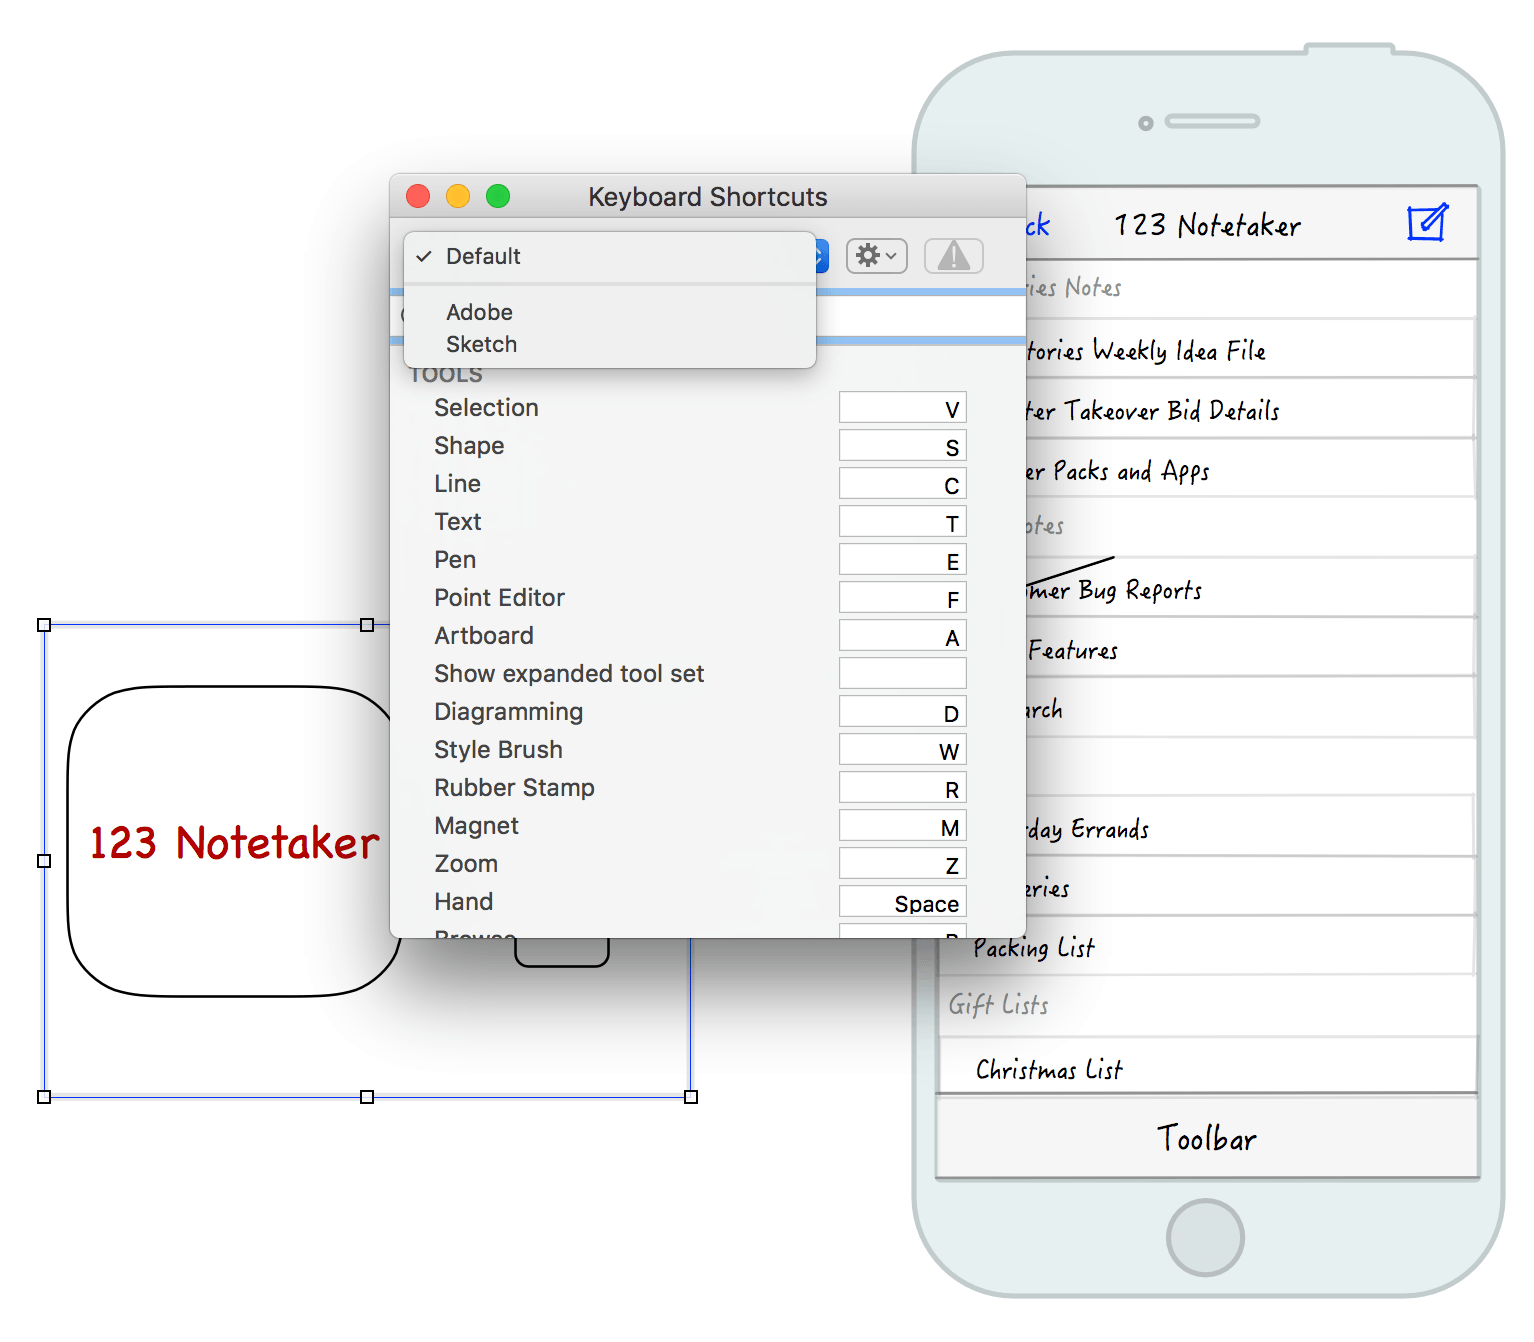 OmniGraffle keyboard shortcuts are highly customizable.